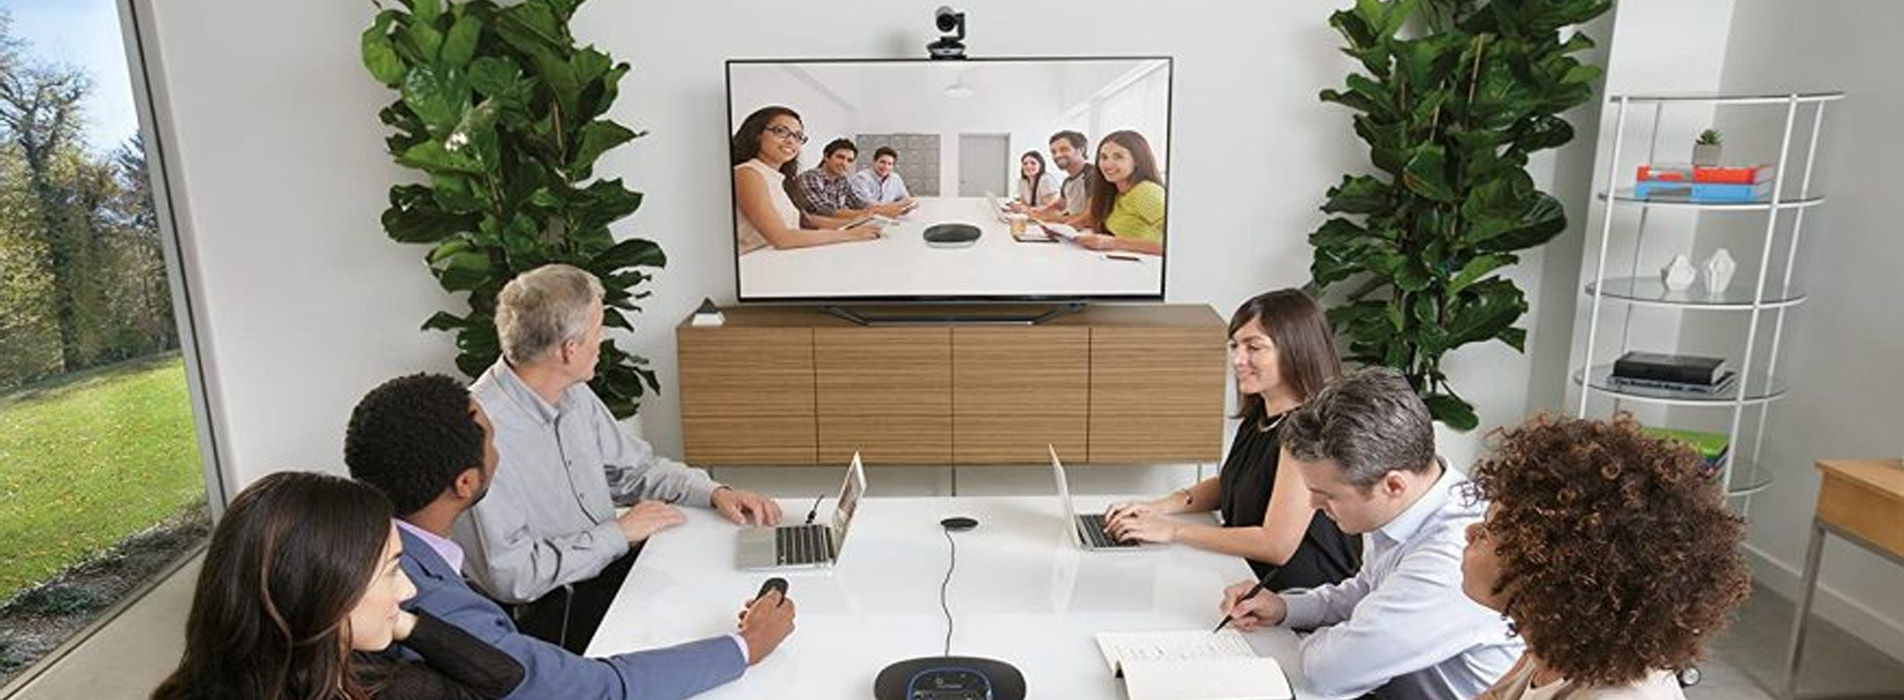 The Top 7 Reasons You Should Invest In A Video Conference System In The Next 72 Hours!